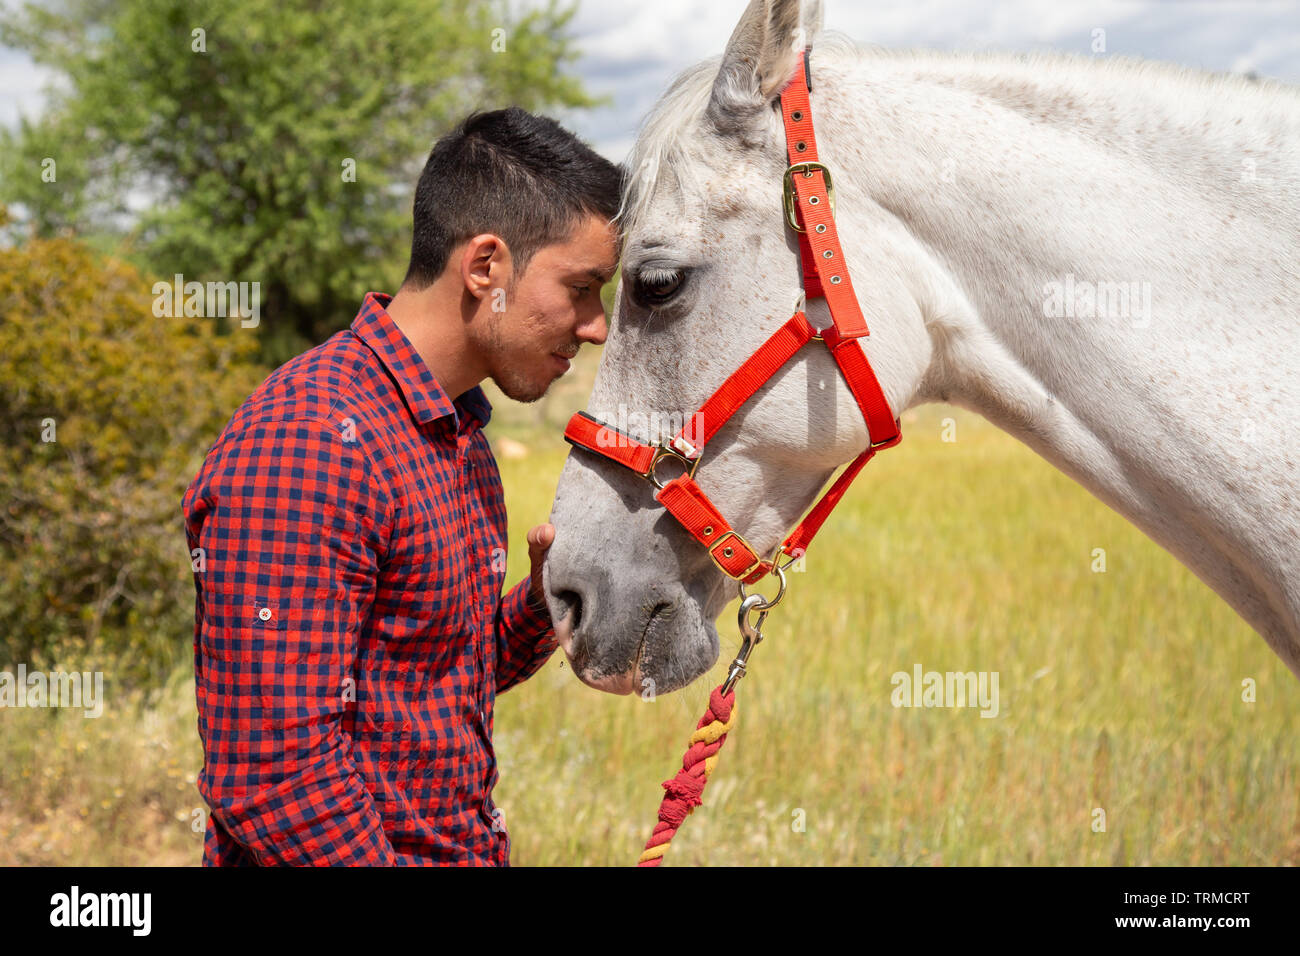 Side view of young male in checkered shirt gently touching head of white horse with red bridle while standing in countryside field on cloudy day Stock Photo